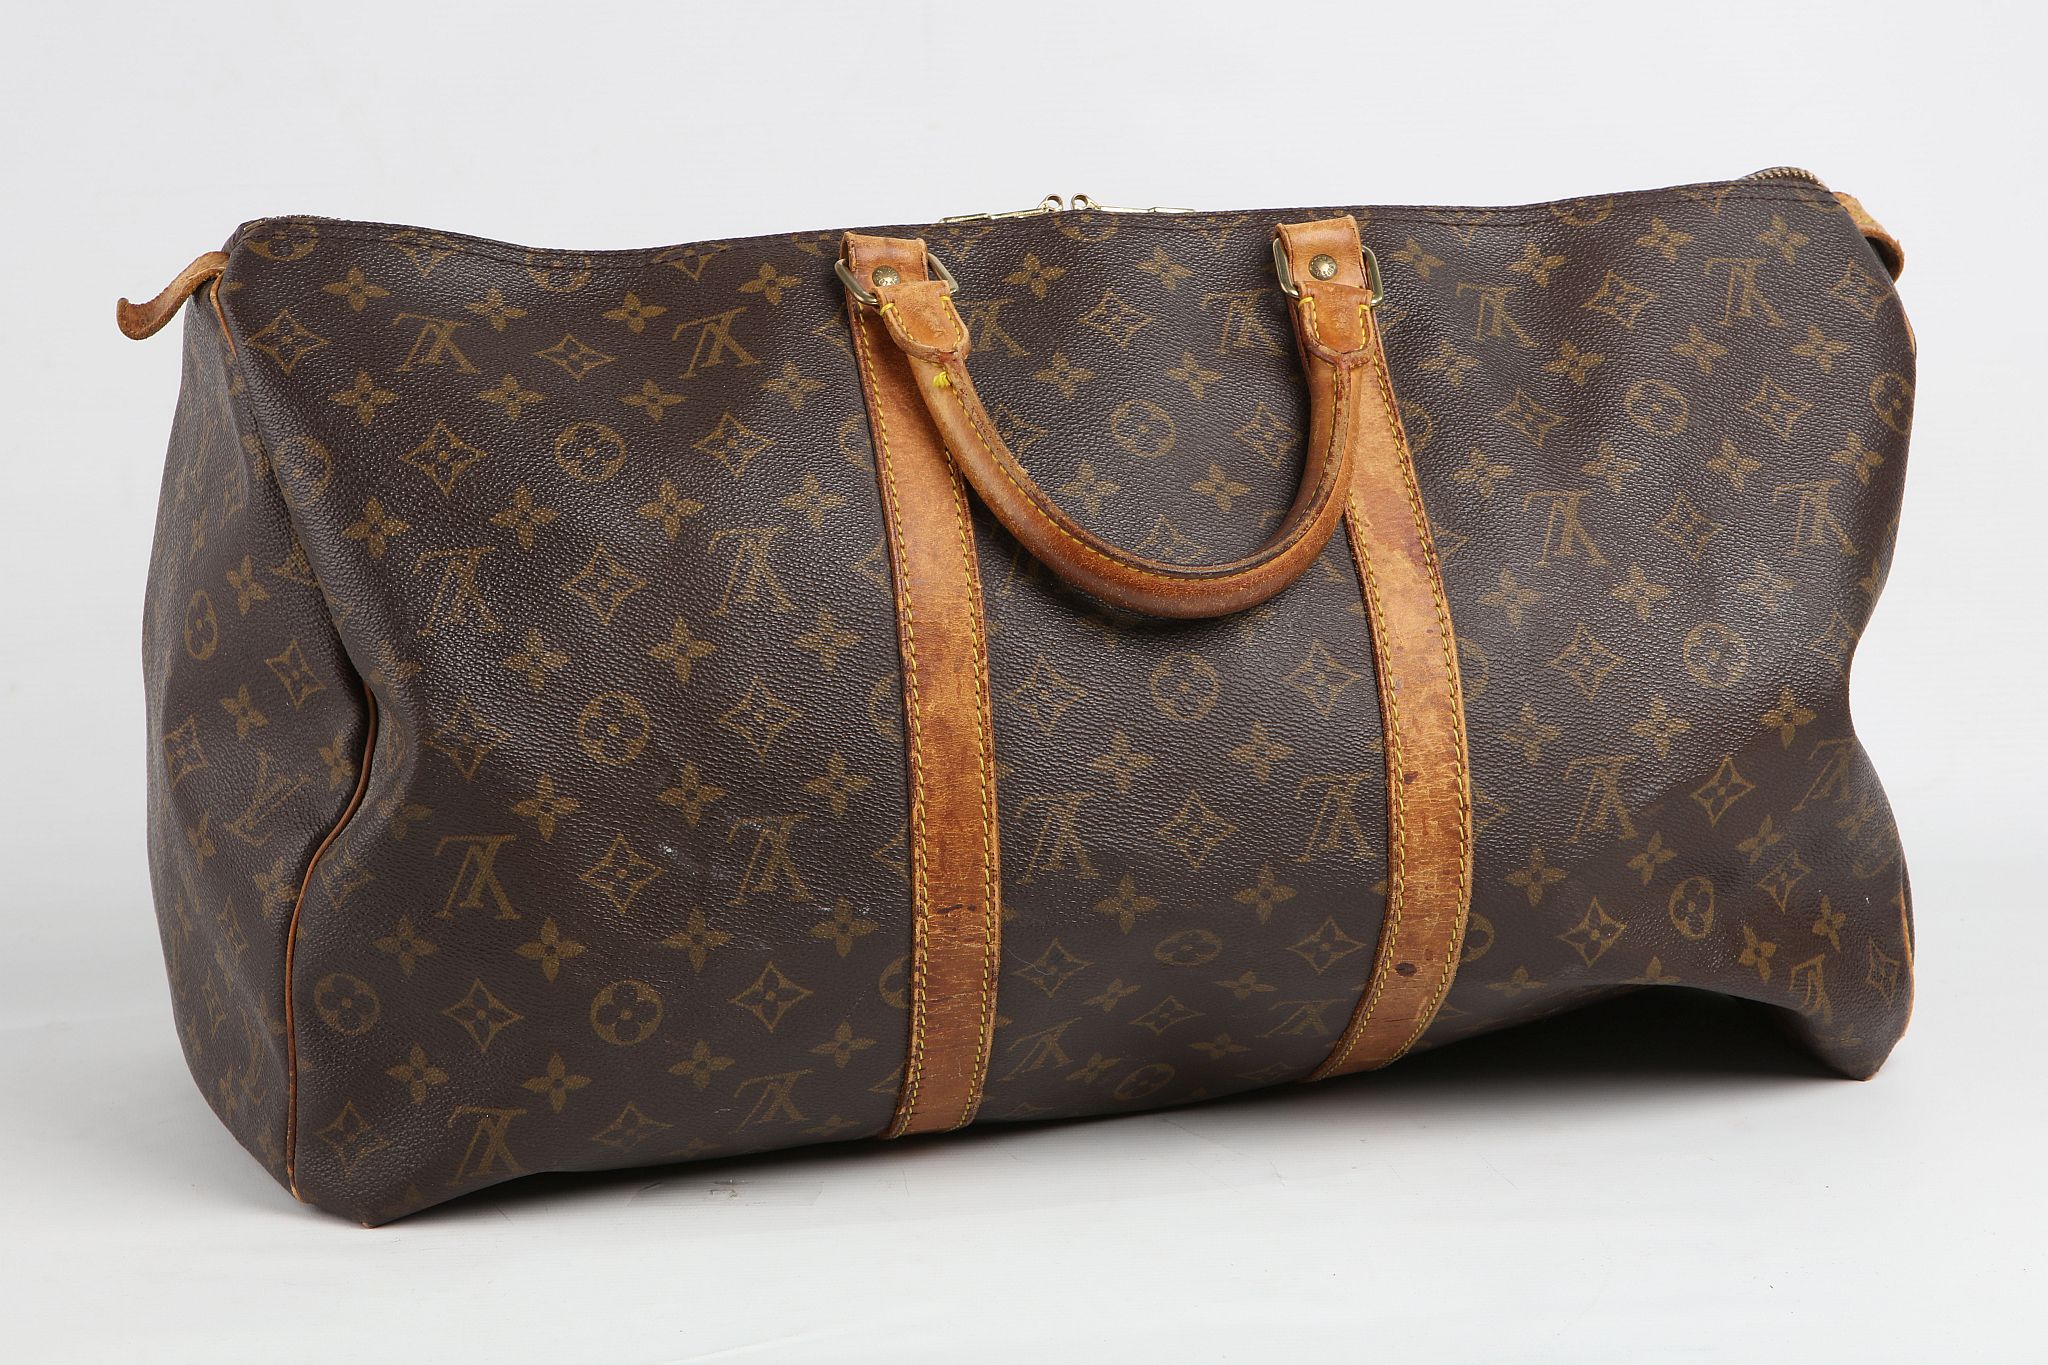 LOUIS VUITTON KEEPALL 50, date code for 1991, monogram canvas with leather trim, 50cm wide, 25cm - Image 3 of 8